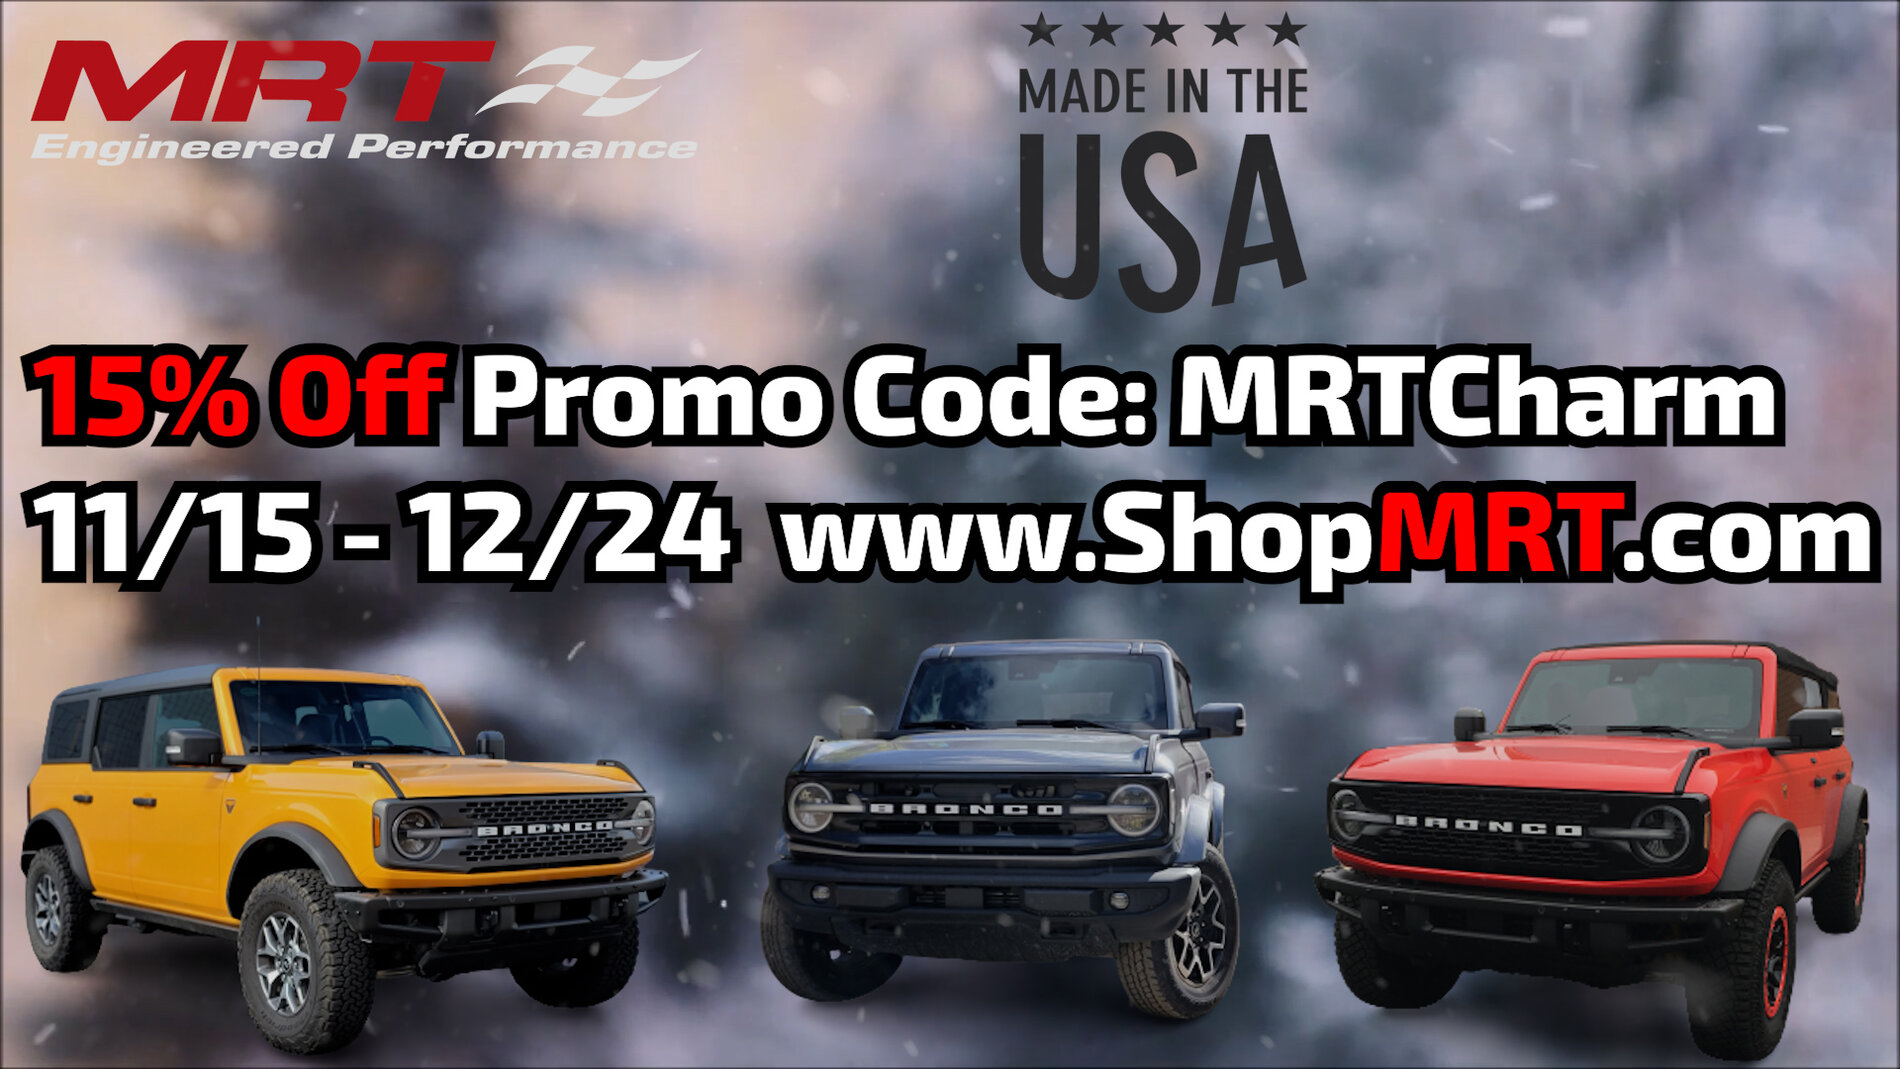 Ford Bronco Holiday Sale! - 15% OFF ALL MRT EXHAUST AND NO DRILL HOOD STRUT KITS SCREENSHOT